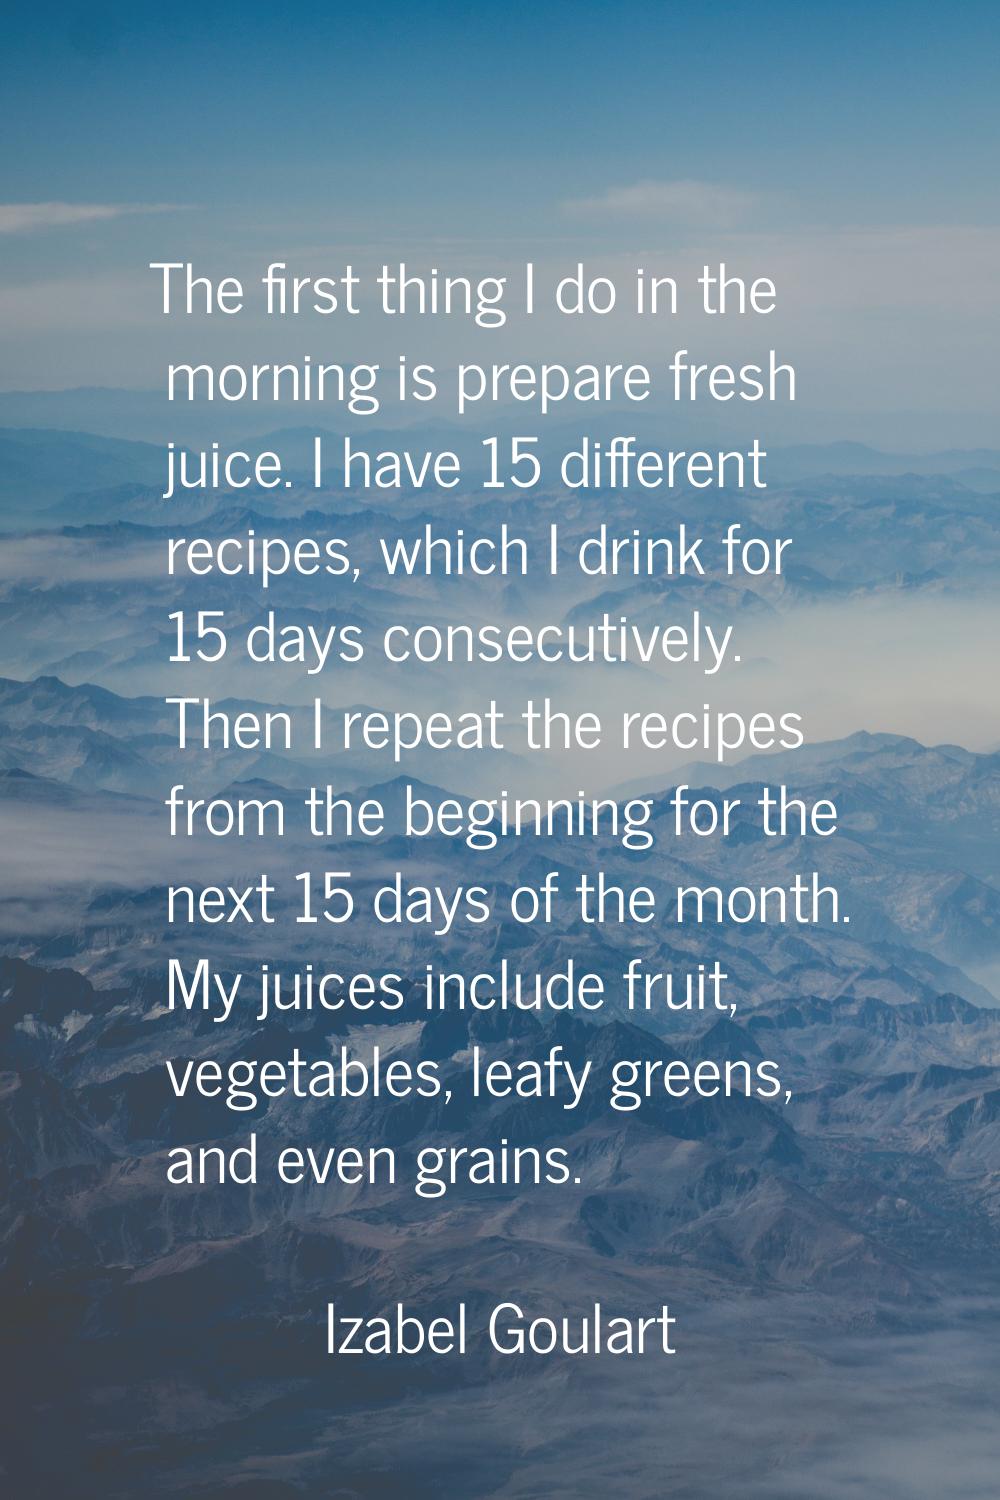 The first thing I do in the morning is prepare fresh juice. I have 15 different recipes, which I dr